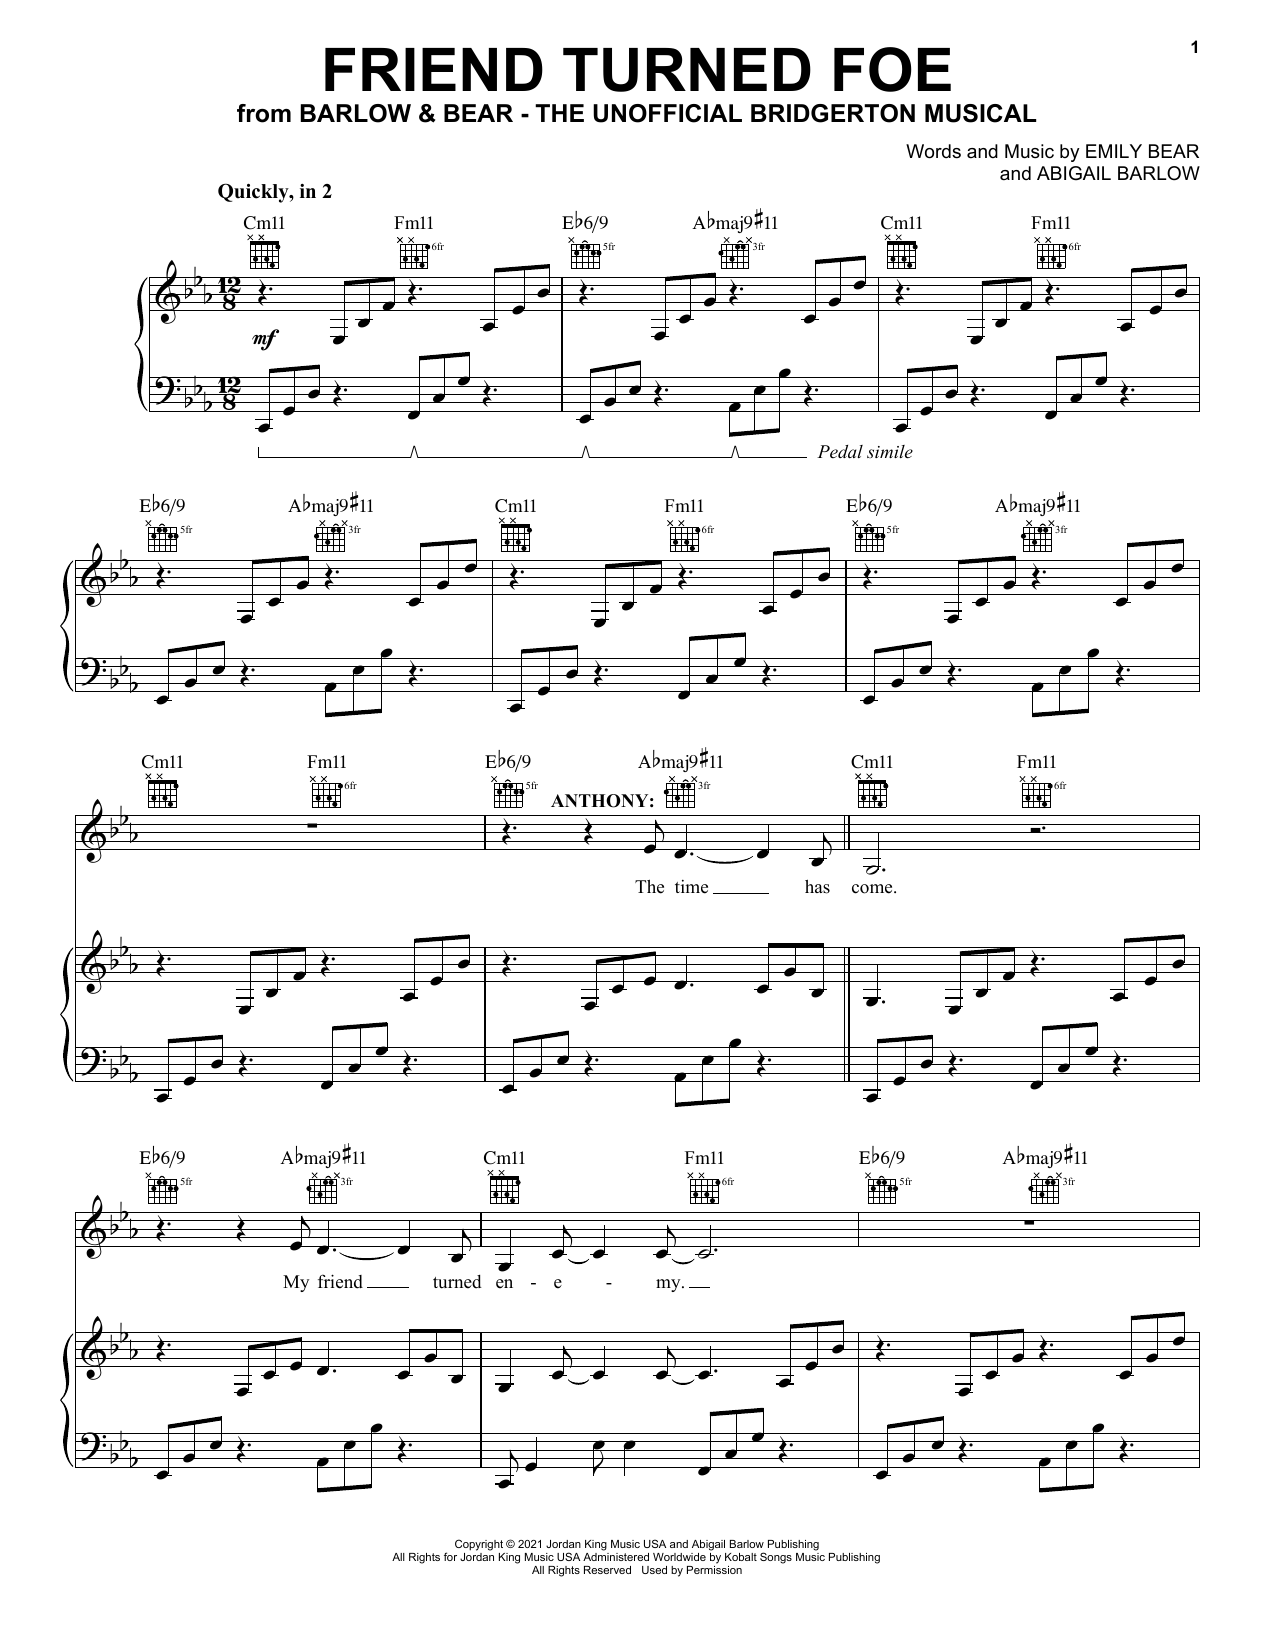 Download Barlow & Bear Friend Turned Foe (from The Unofficial Sheet Music